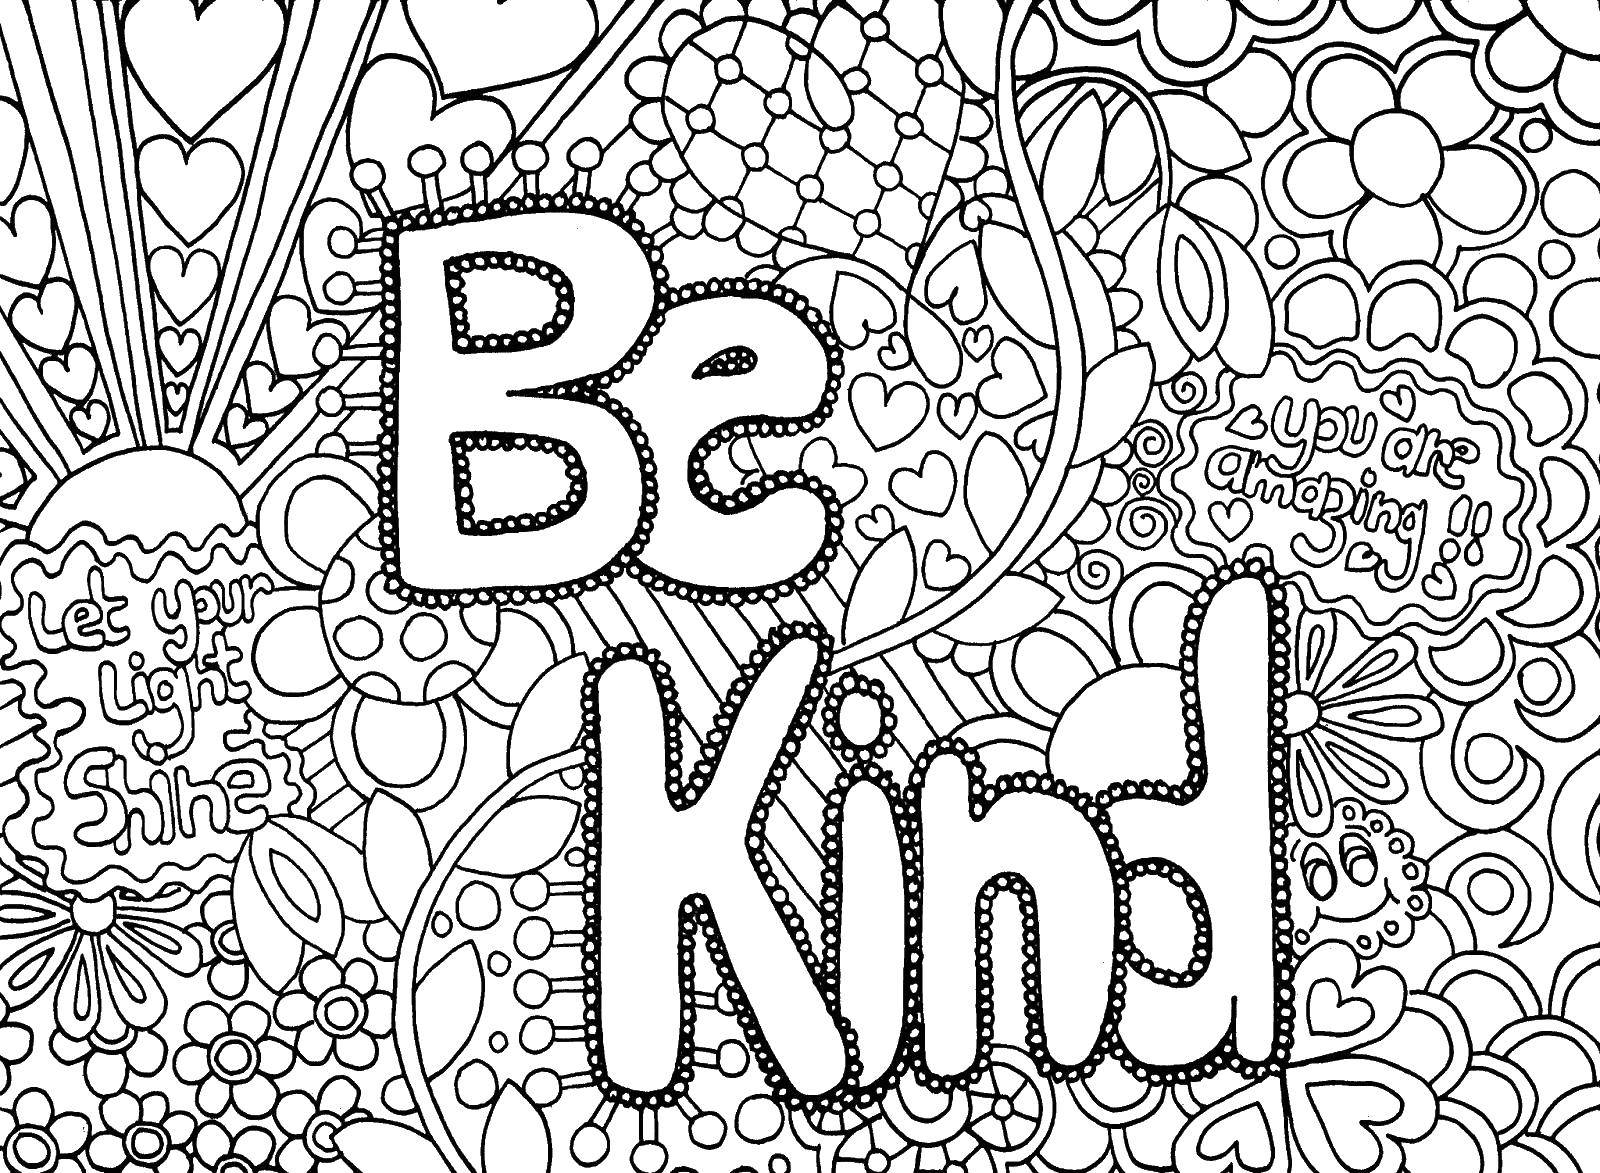 Coloring Be kind. Category English. Tags:  be kind , be kind.